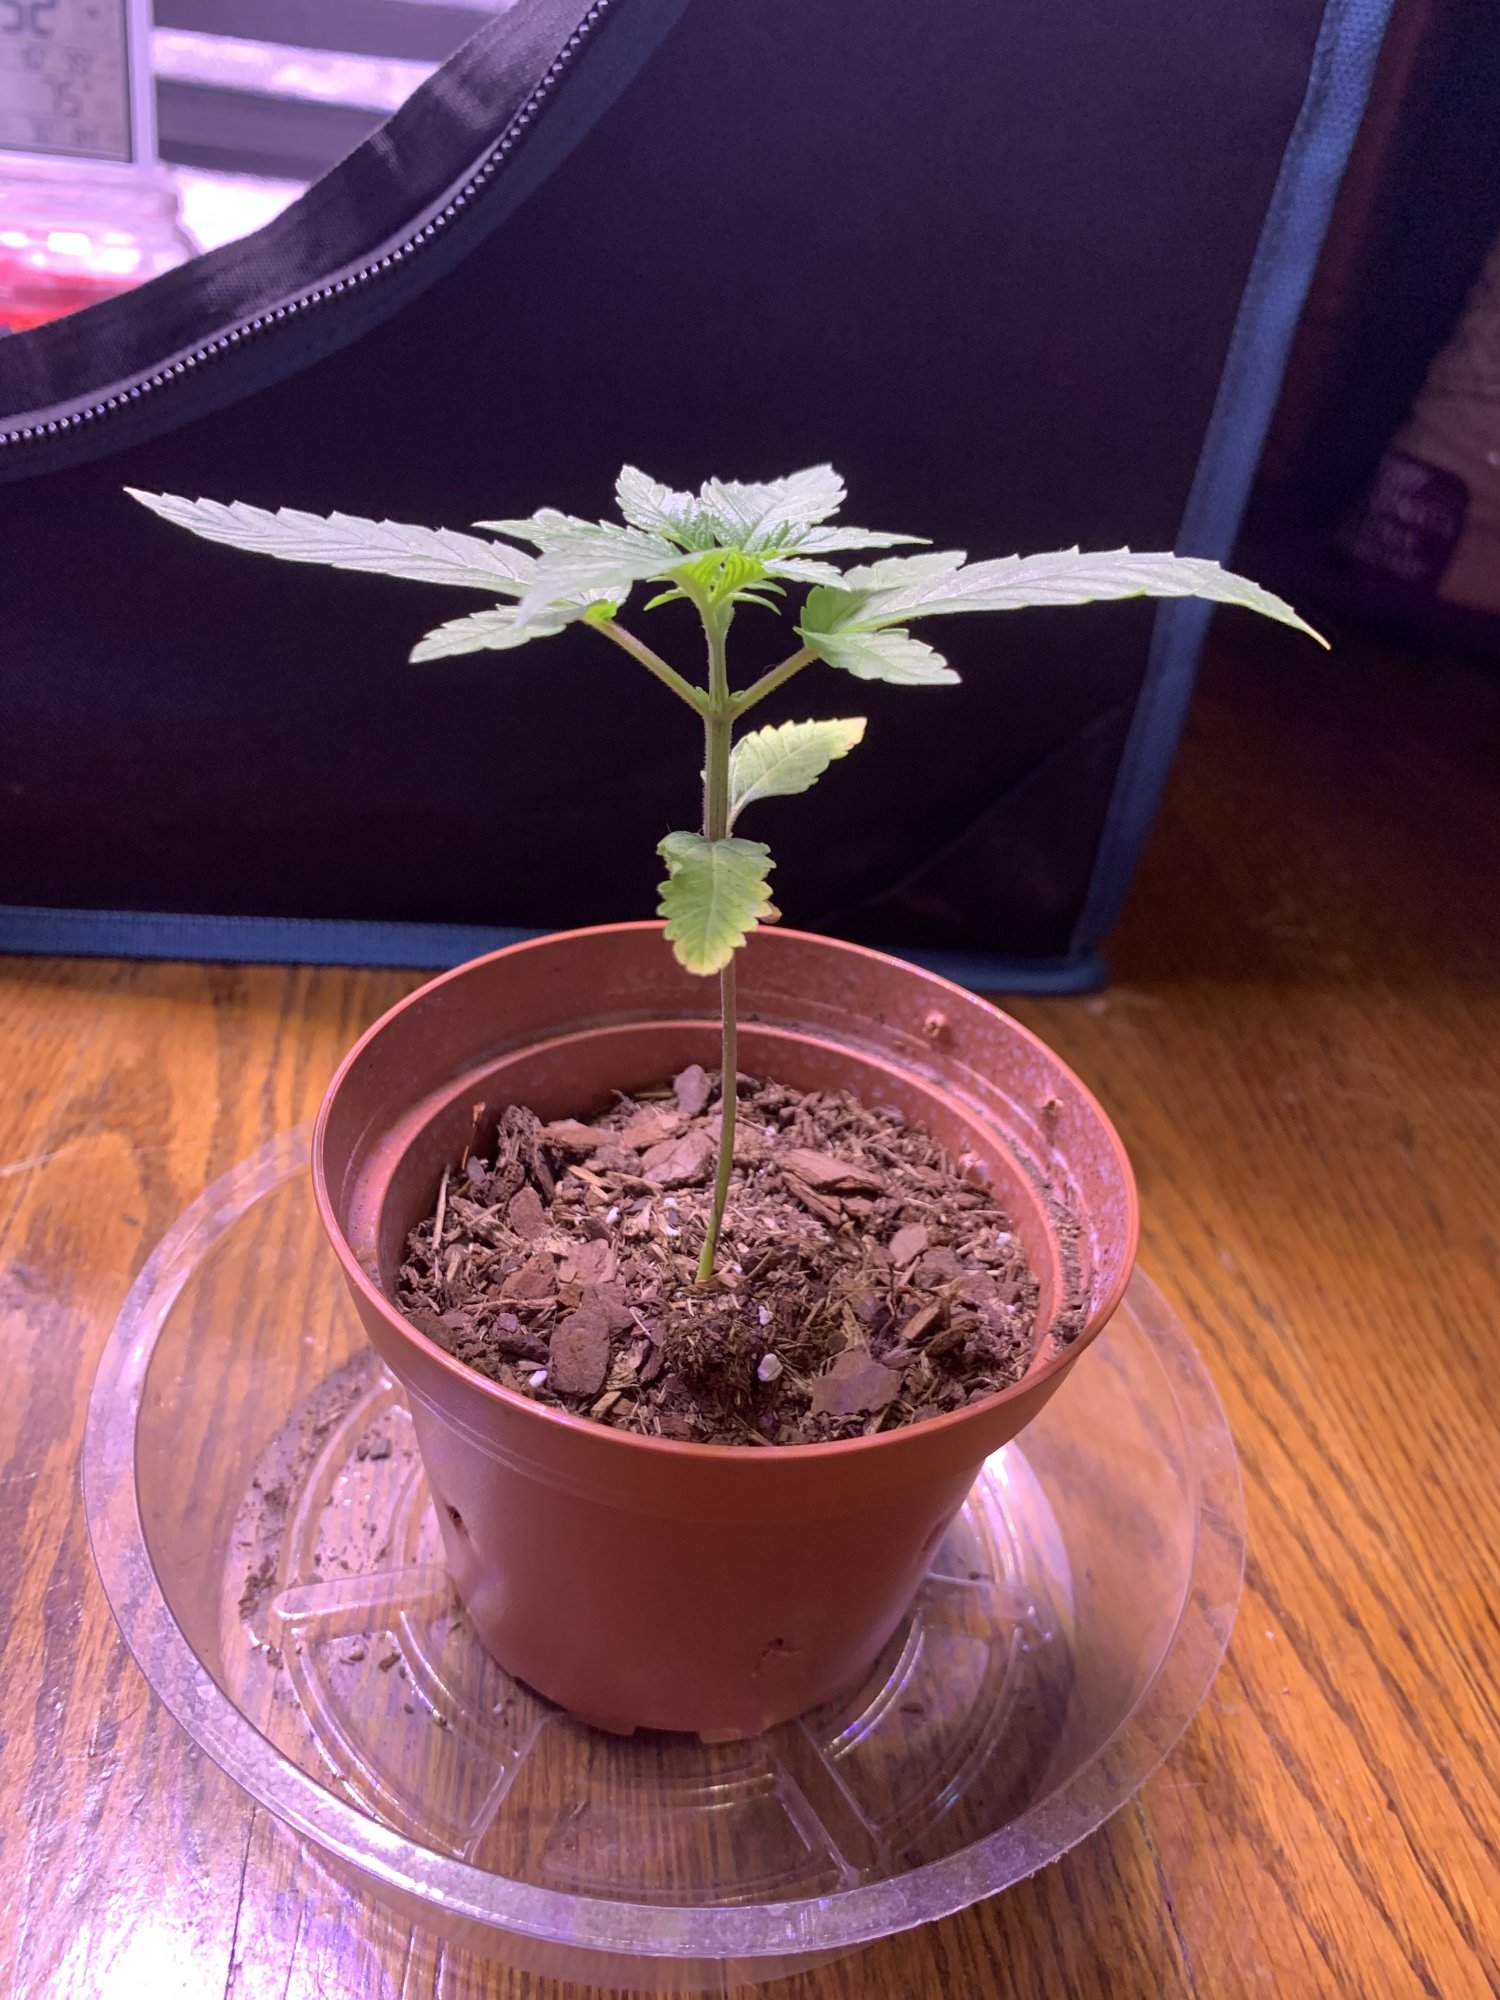 First time grower yellowing leaves 6